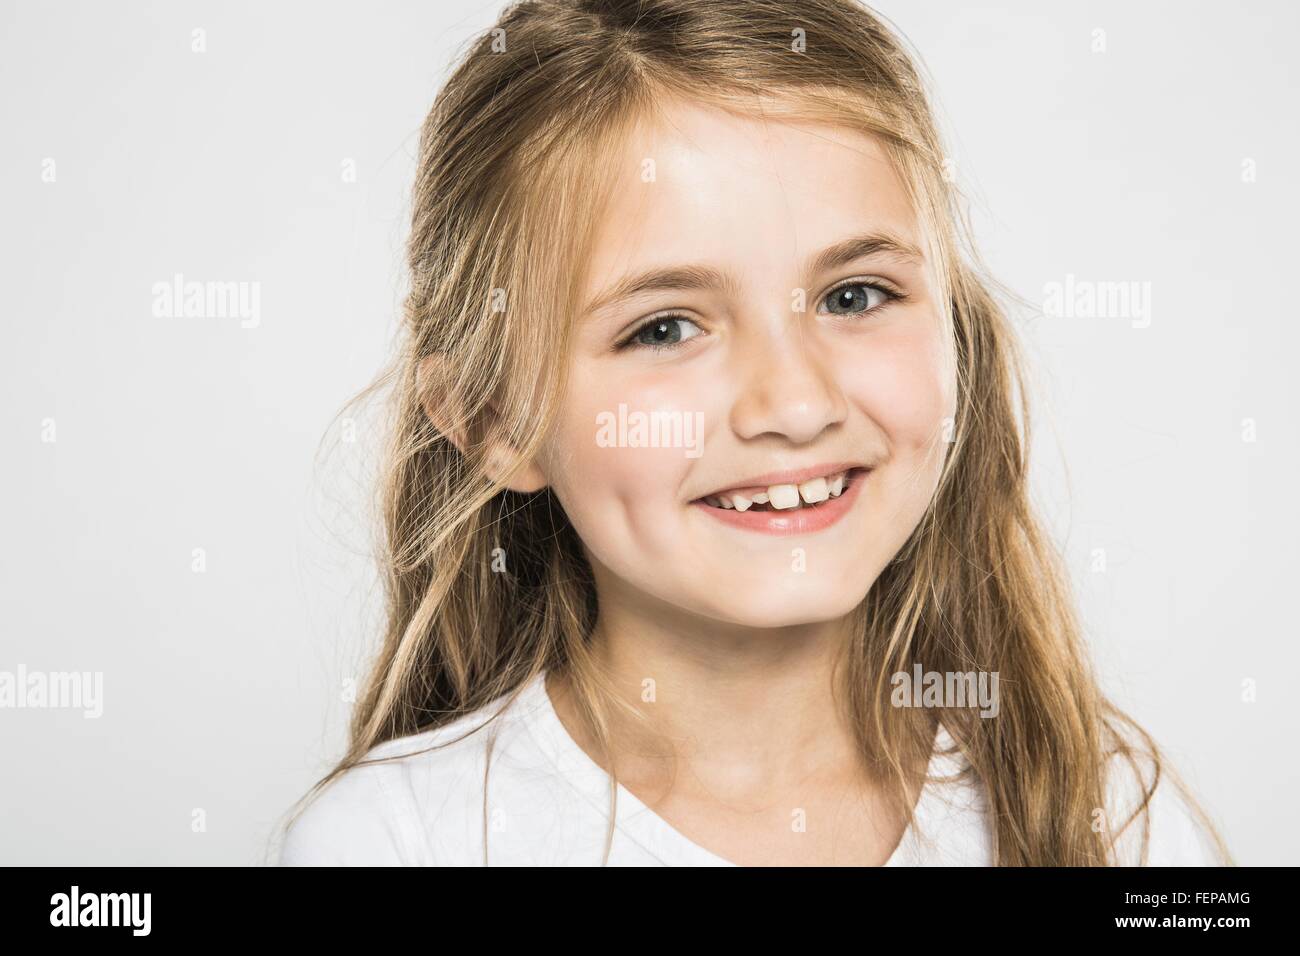 Studio portrait of happy girl with long blond hair Stock Photo